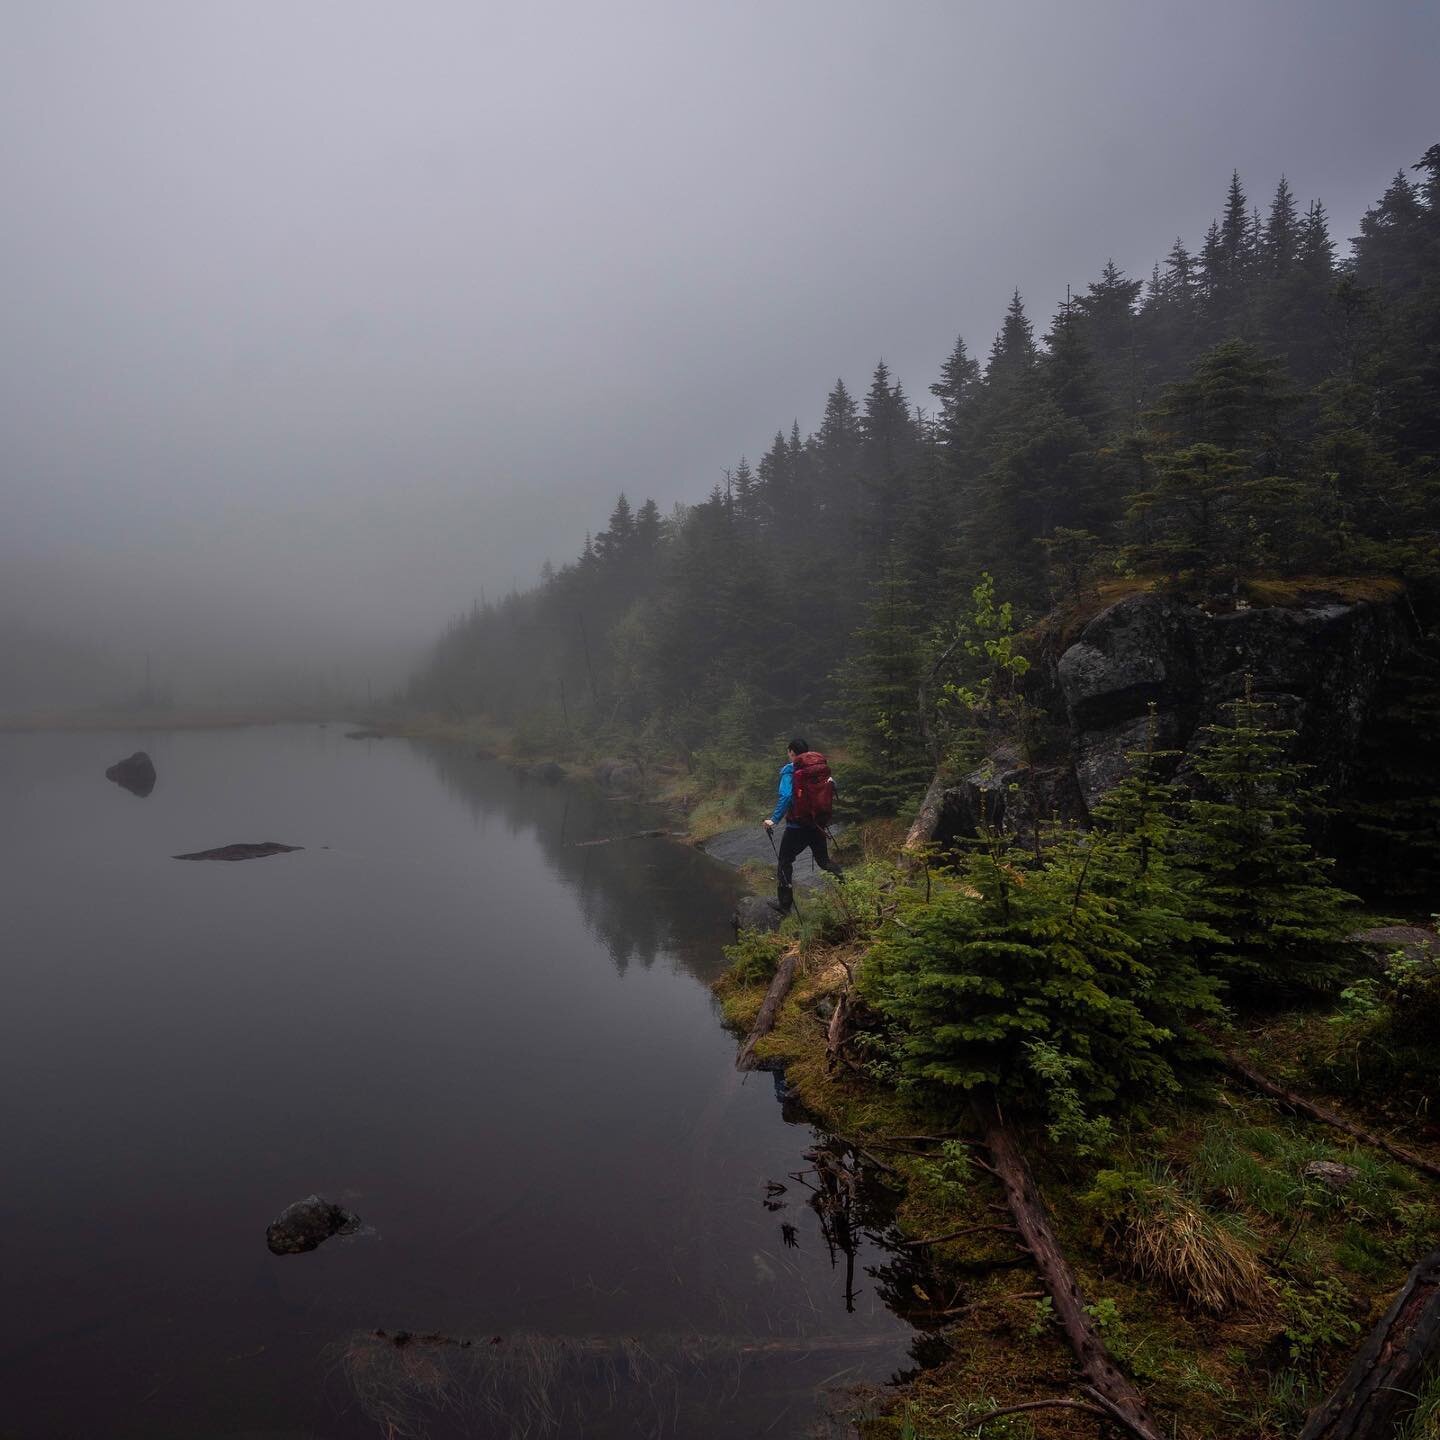 Lake Tear of the Clouds - source of the mighty Hudson River. 

It&rsquo;s difficult to fathom that all the water flowing down the western side of Manhattan starts at this misty alpine tarn. It was harder even to reach. But around lunchtime on day two